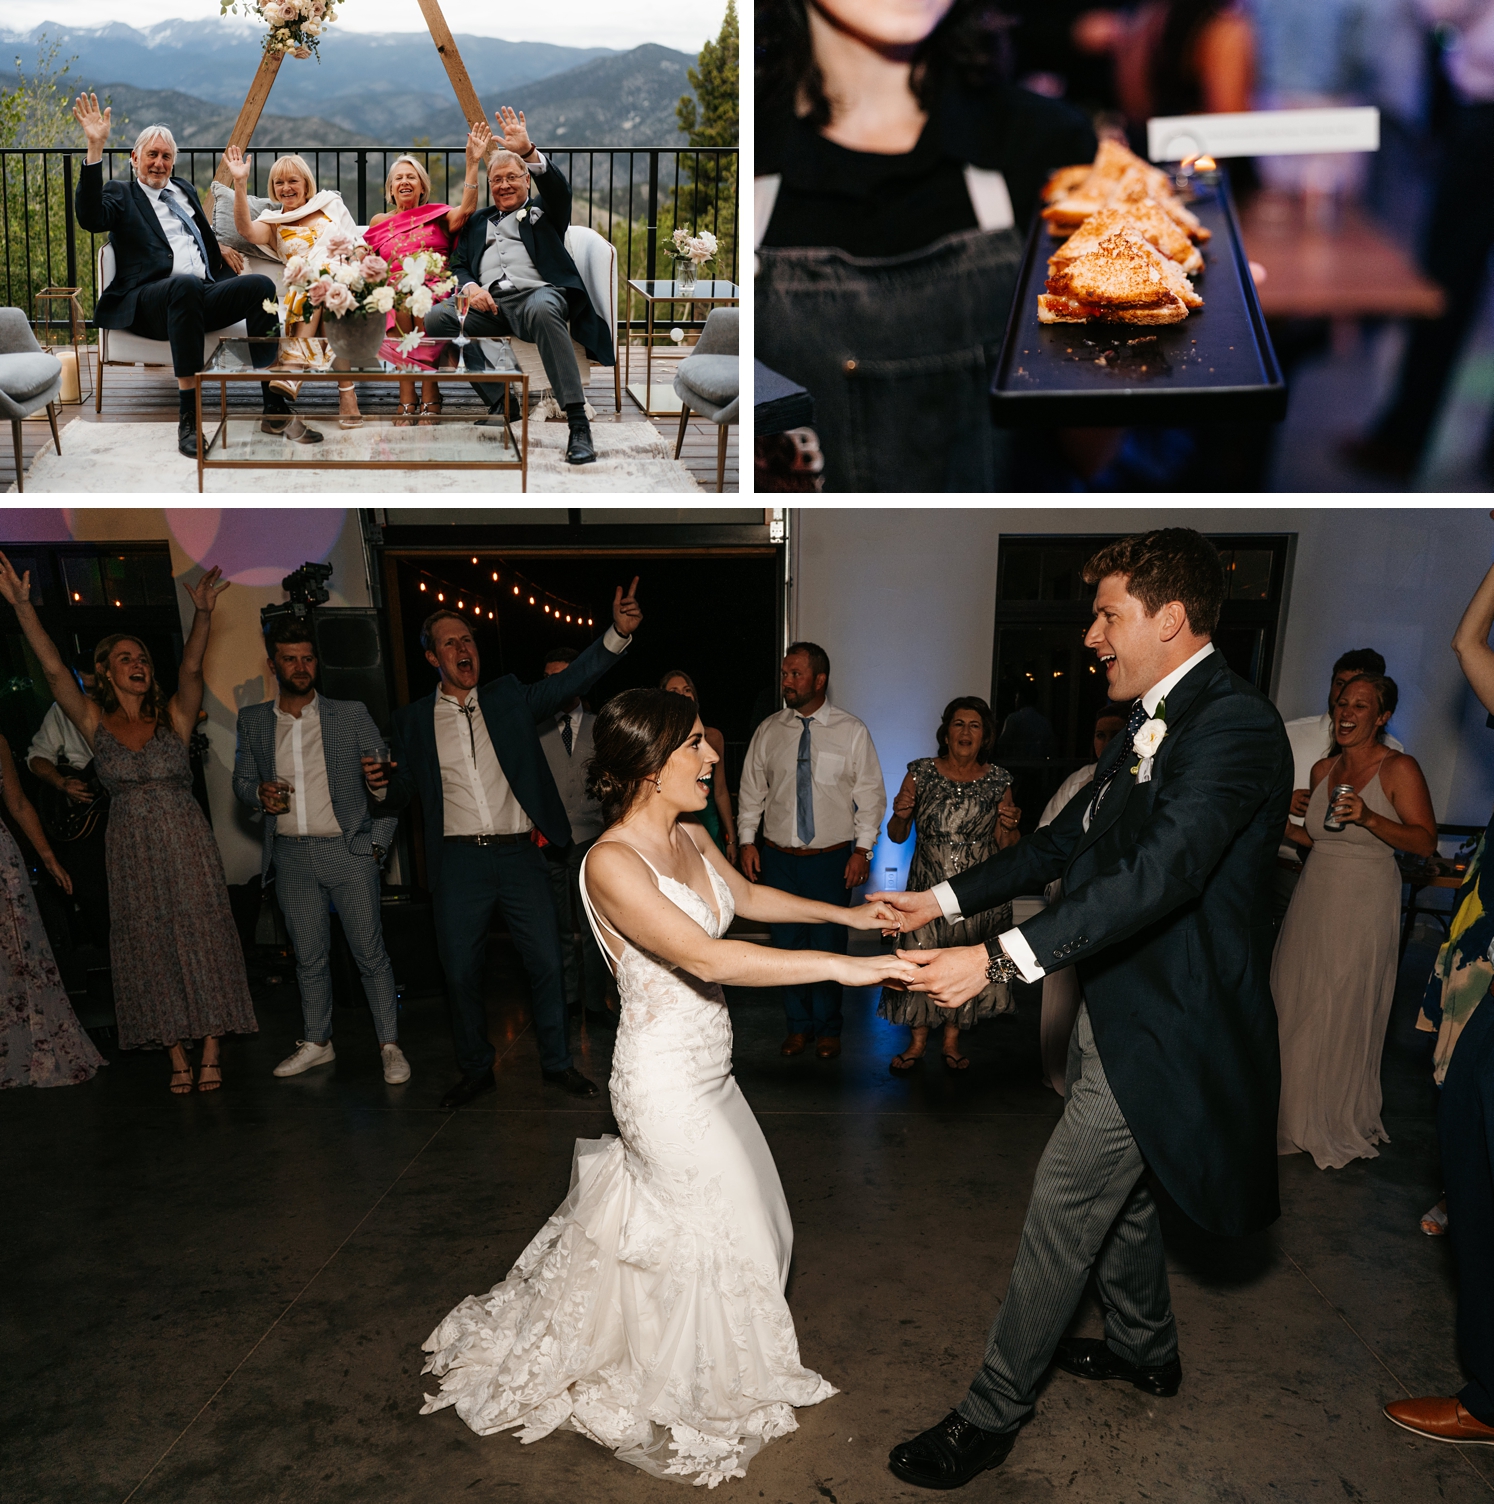 Wedding guests sitting on lounge set at North Star Gatherings | late night grilled cheese at wedding reception | bride and groom dancing at wedding reception at North Star Gatherings | McArthur Weddings and Events